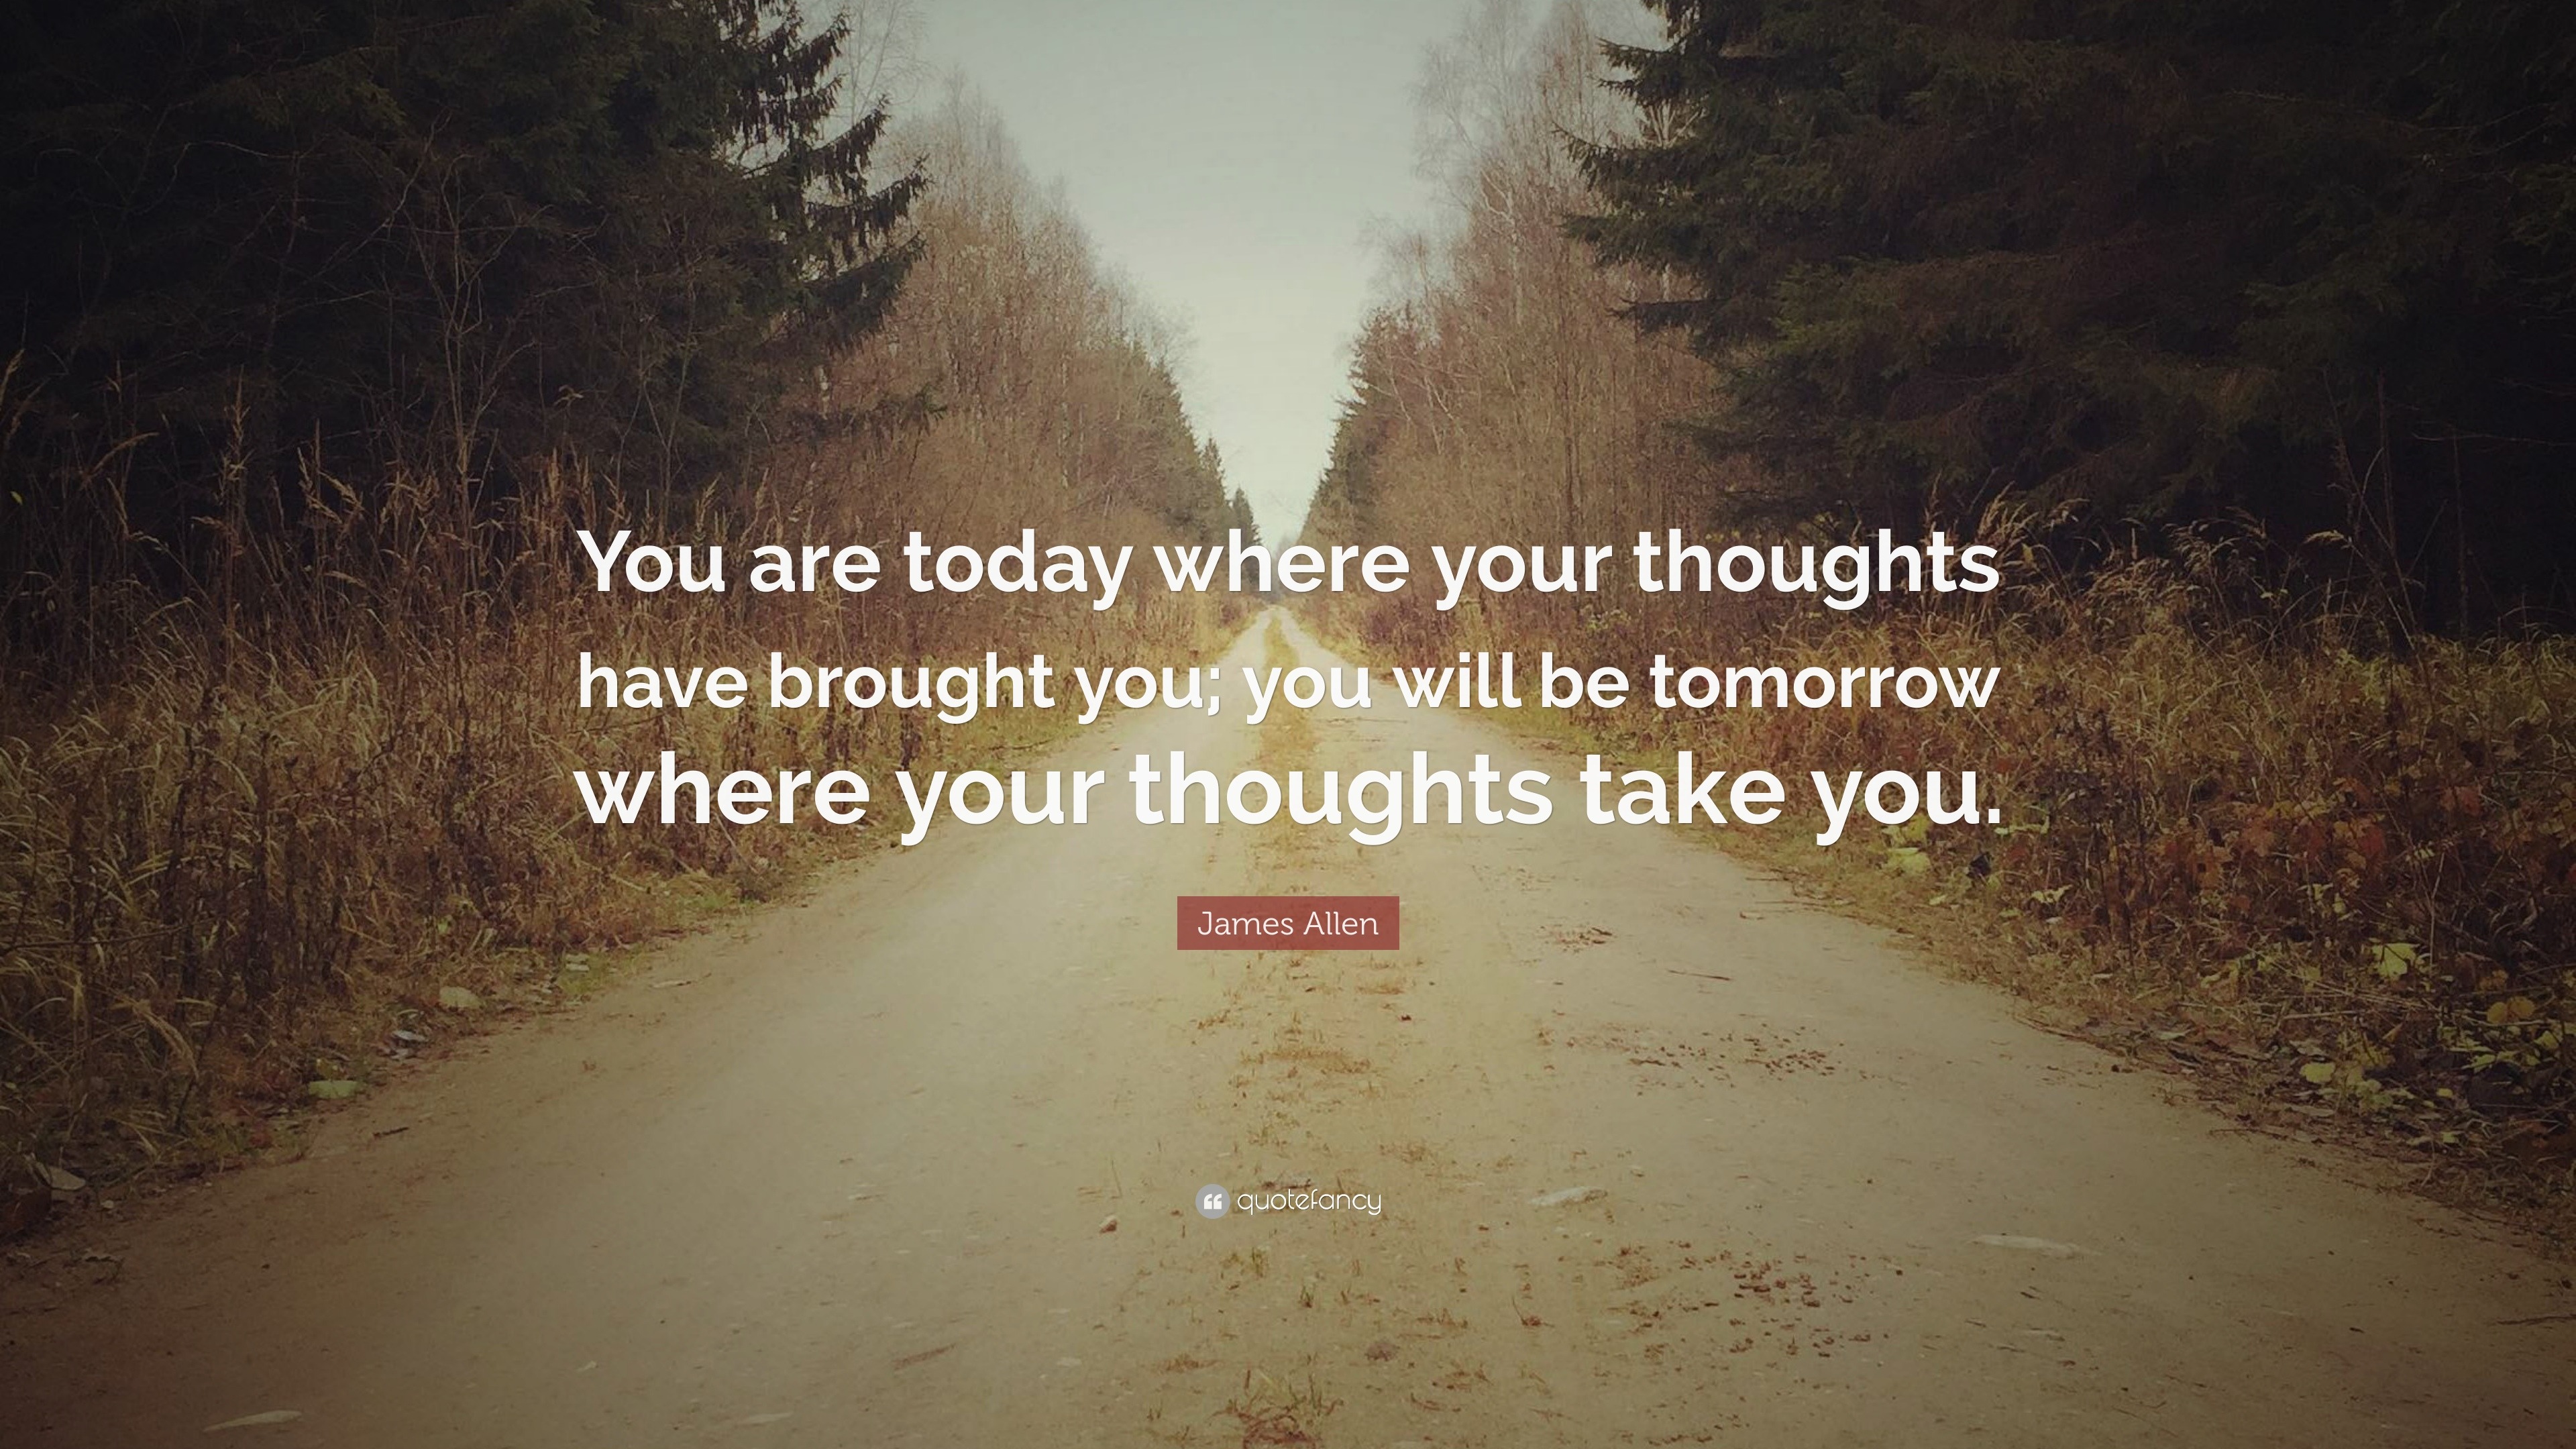 James Allen Quote: "You are today where your thoughts have ...